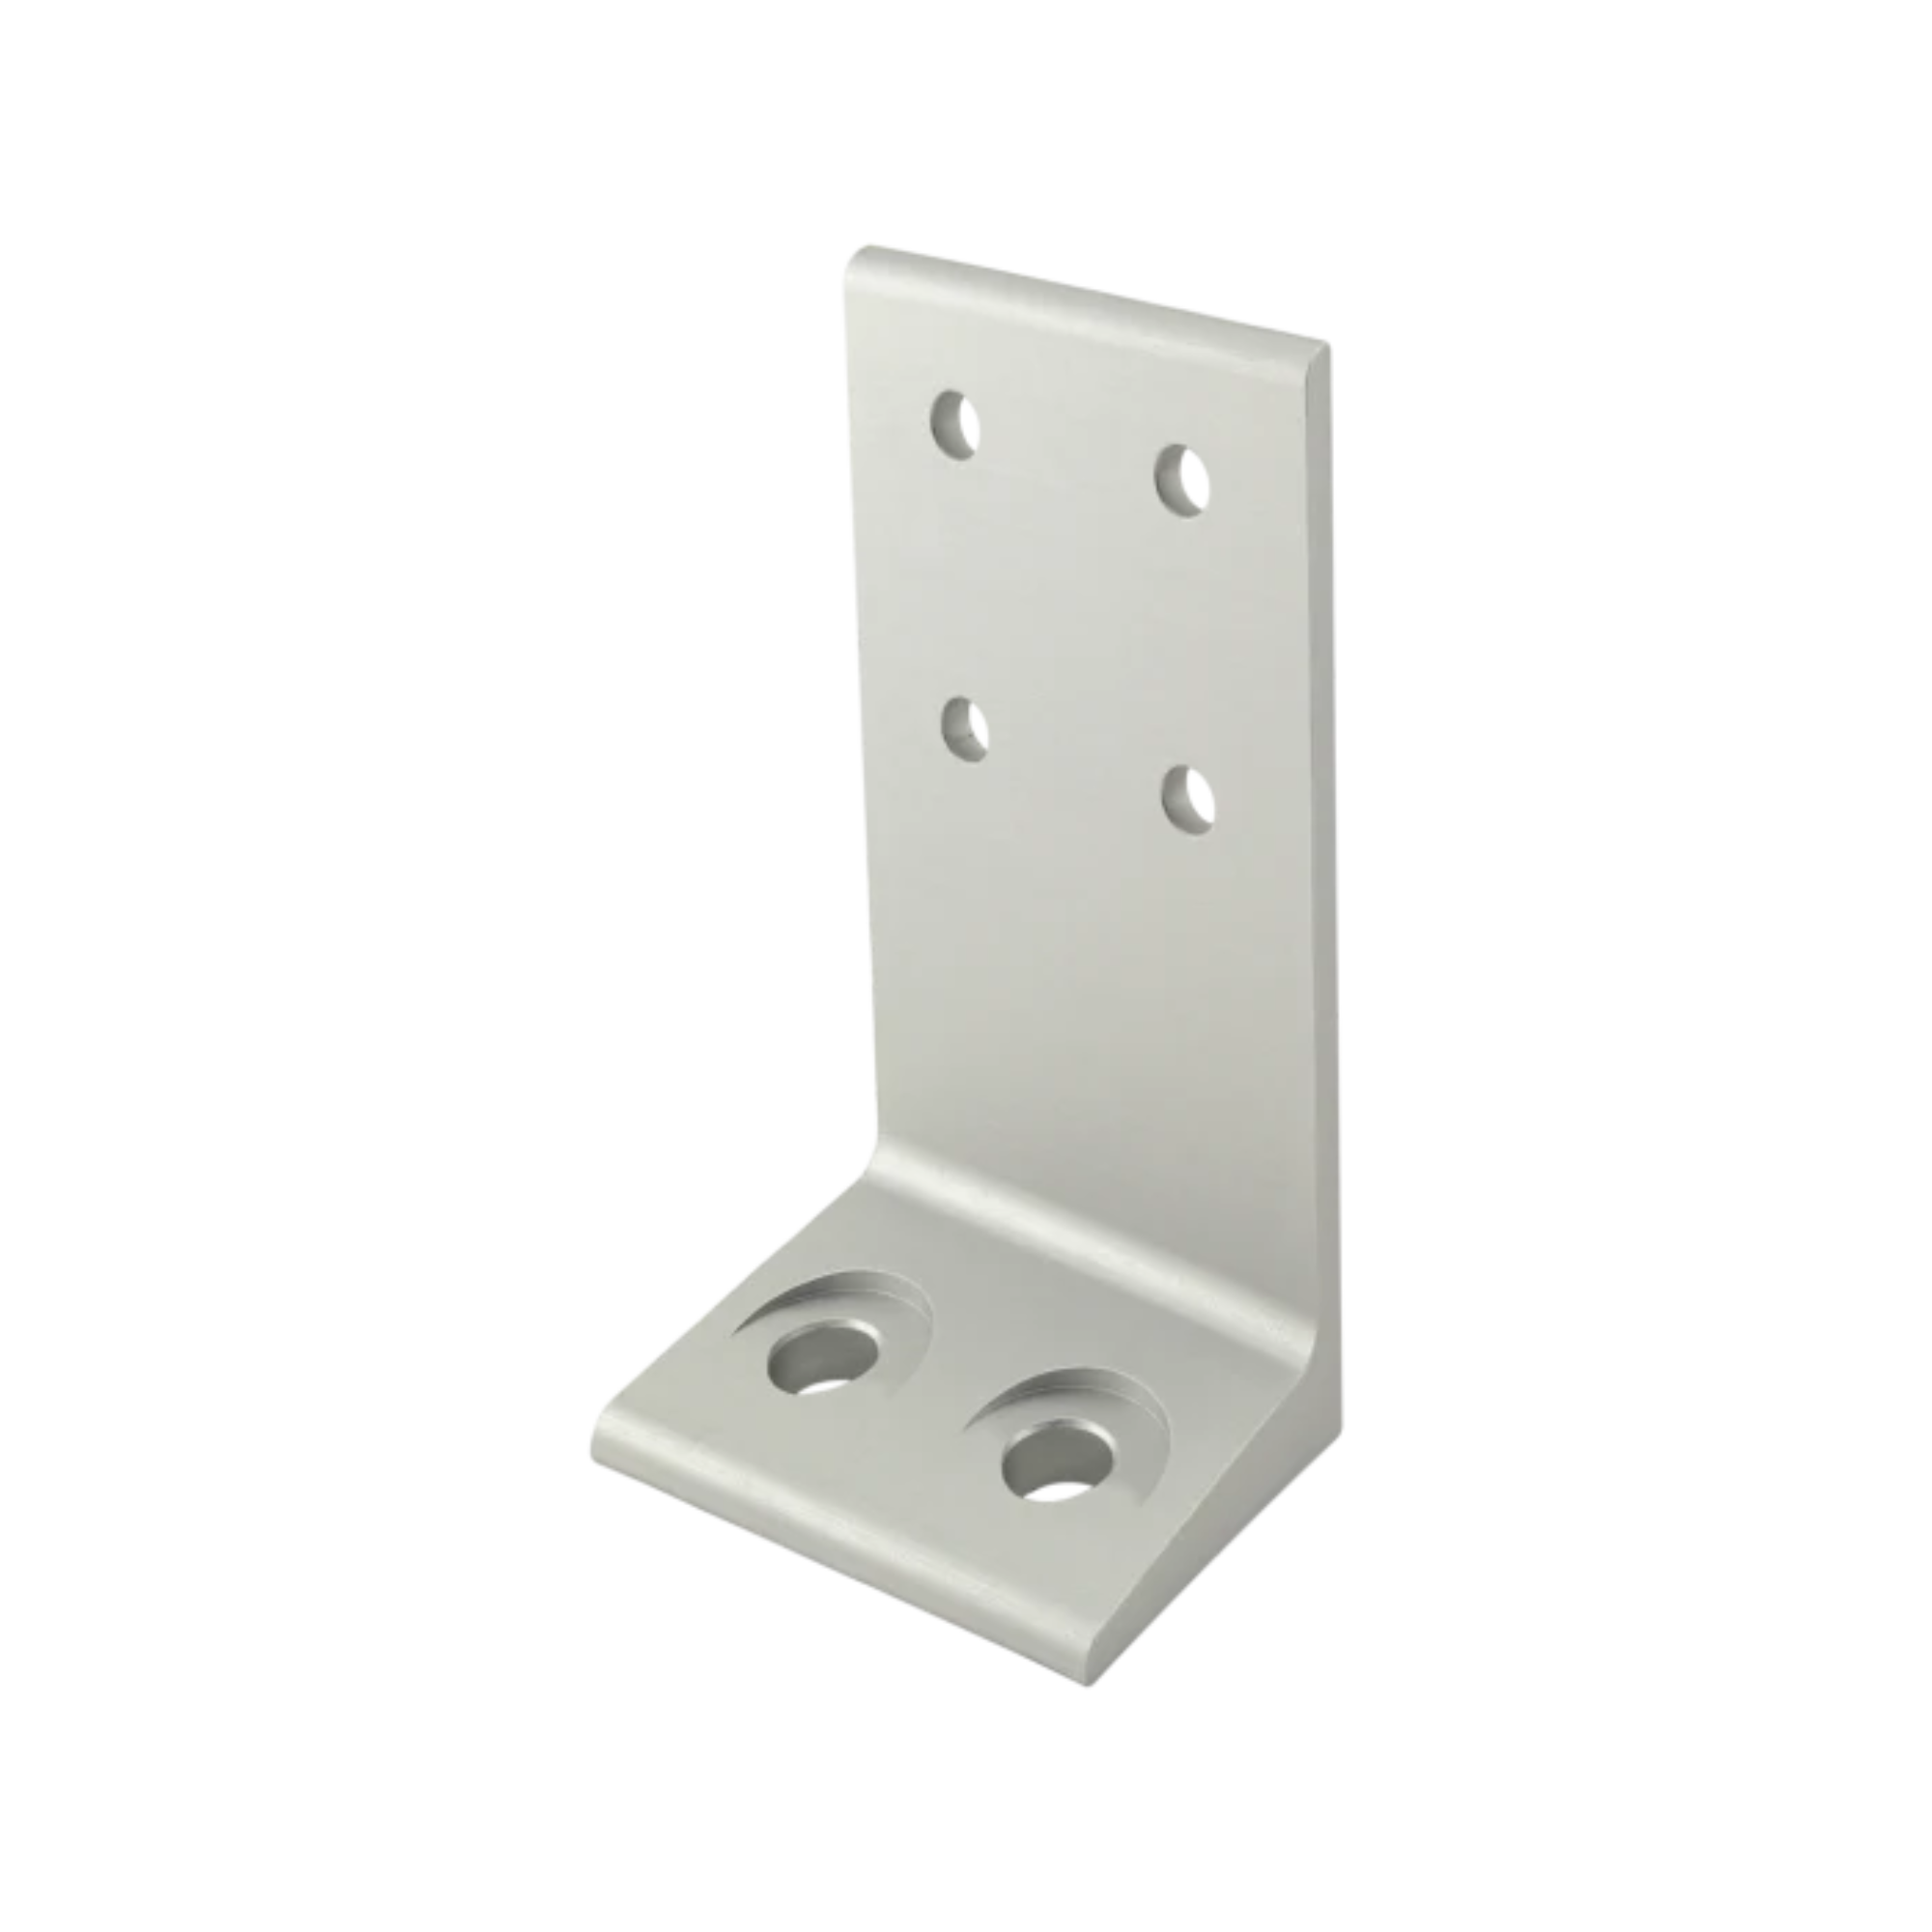 L-shaped, aluminum floor mount bracket with two sunken mounting holes on the bottom piece and four mounting holes on the side piece